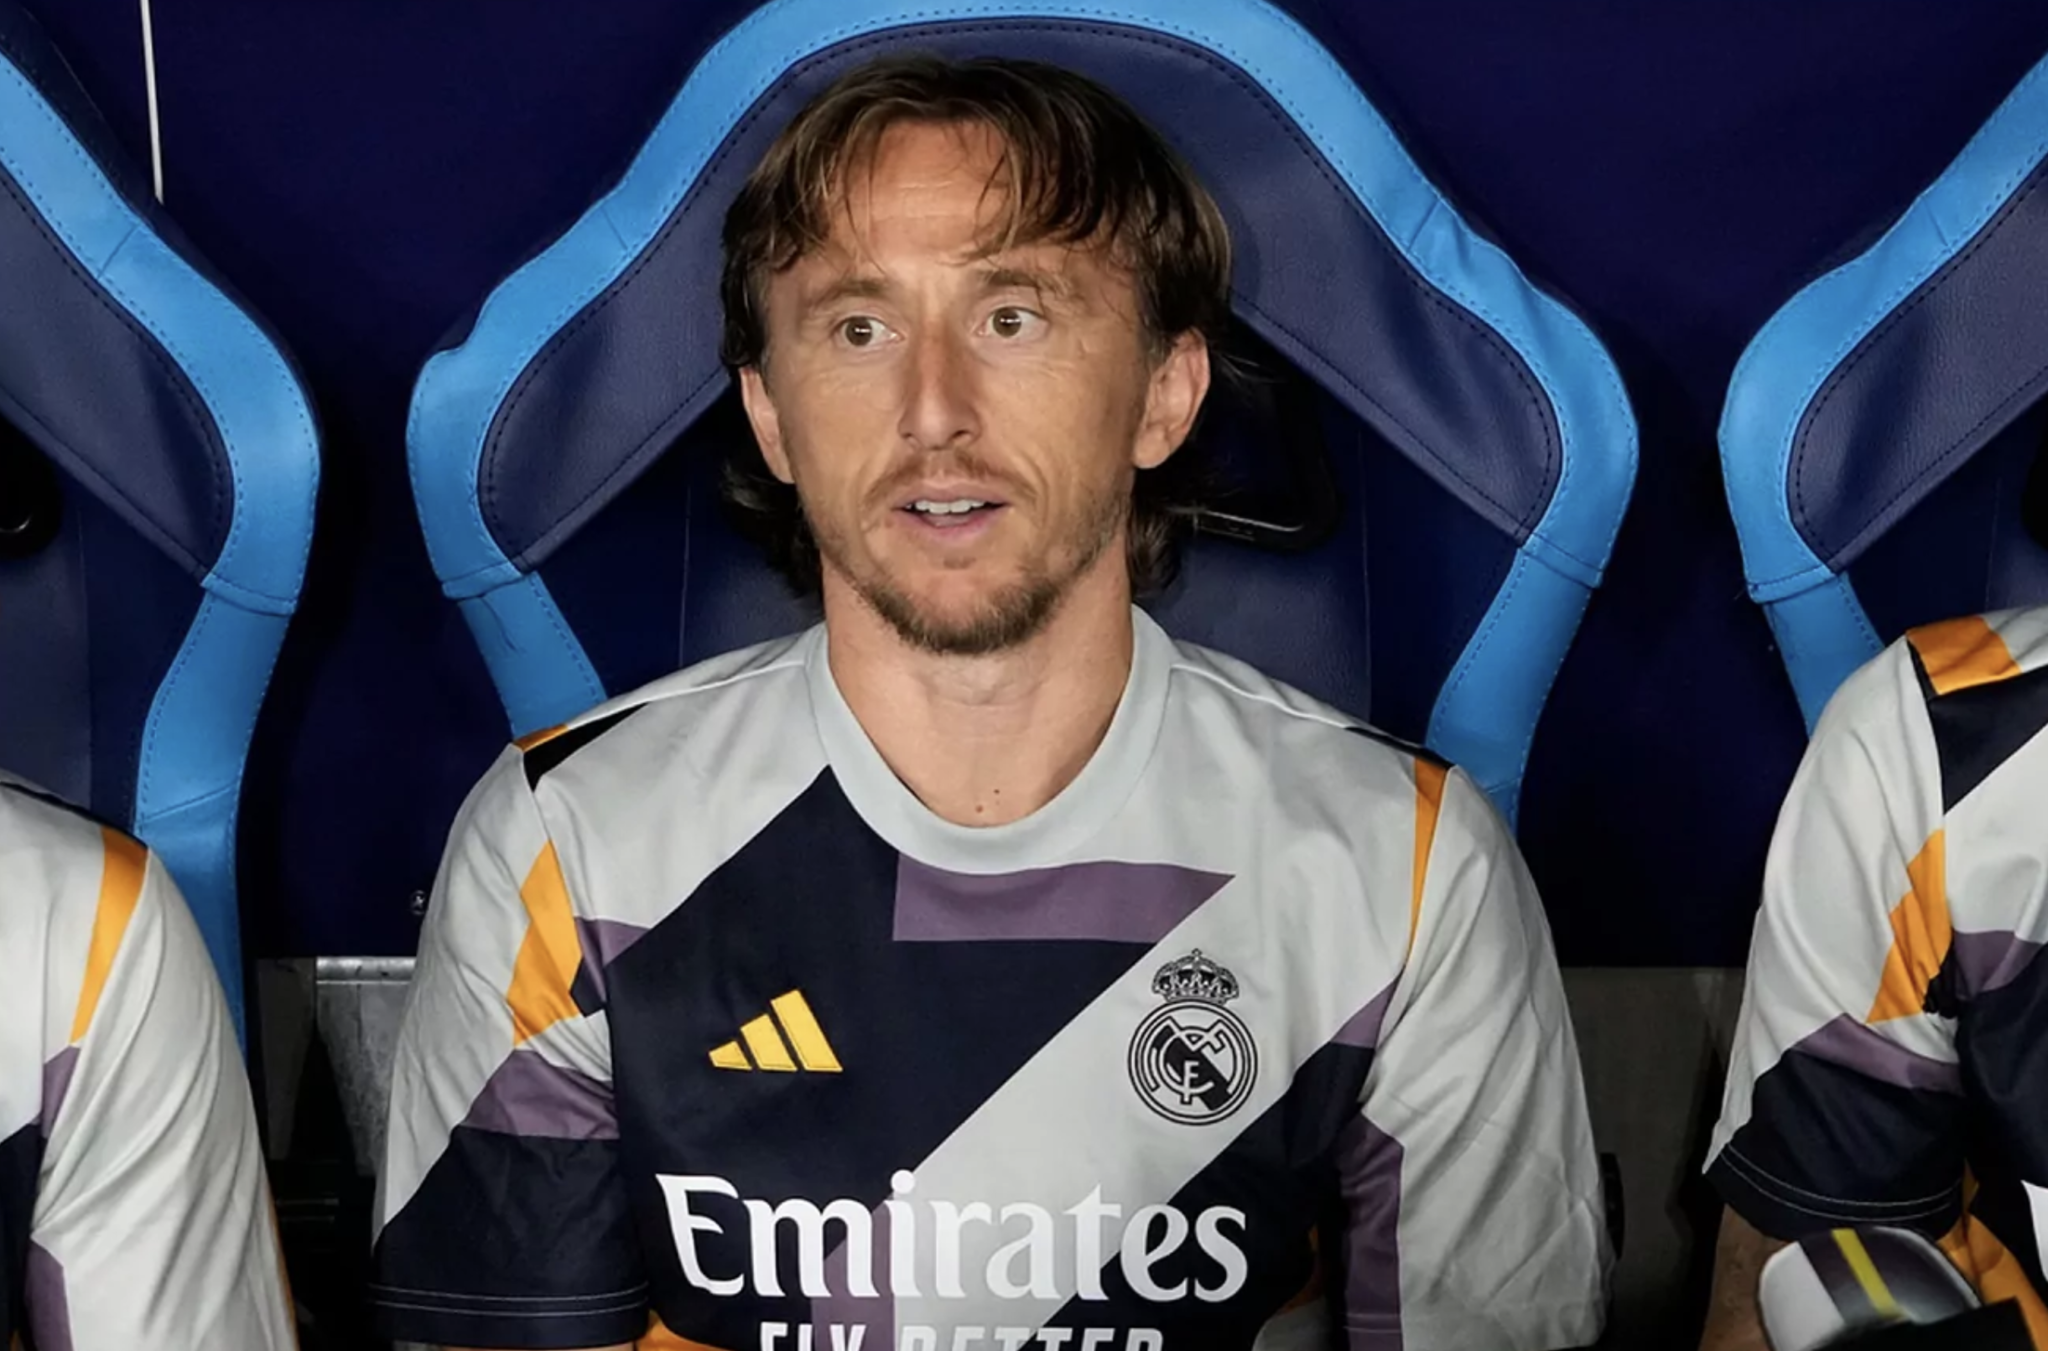 Could Modric leave Real Madrid amid MLS rumors? This is what Ancelotti has to say